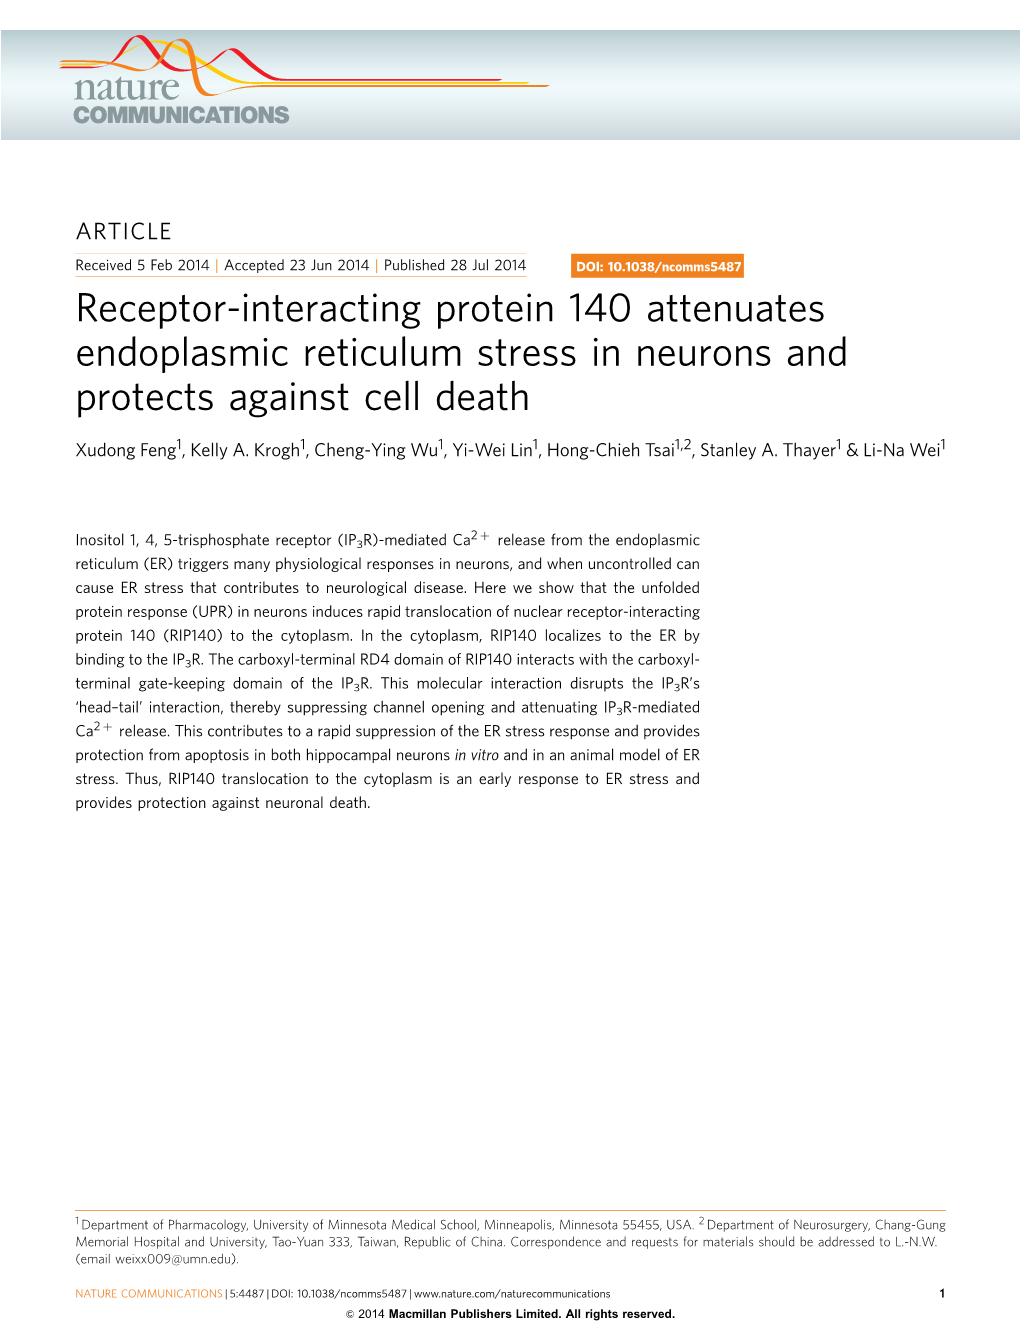 Receptor-Interacting Protein 140 Attenuates Endoplasmic Reticulum Stress in Neurons and Protects Against Cell Death